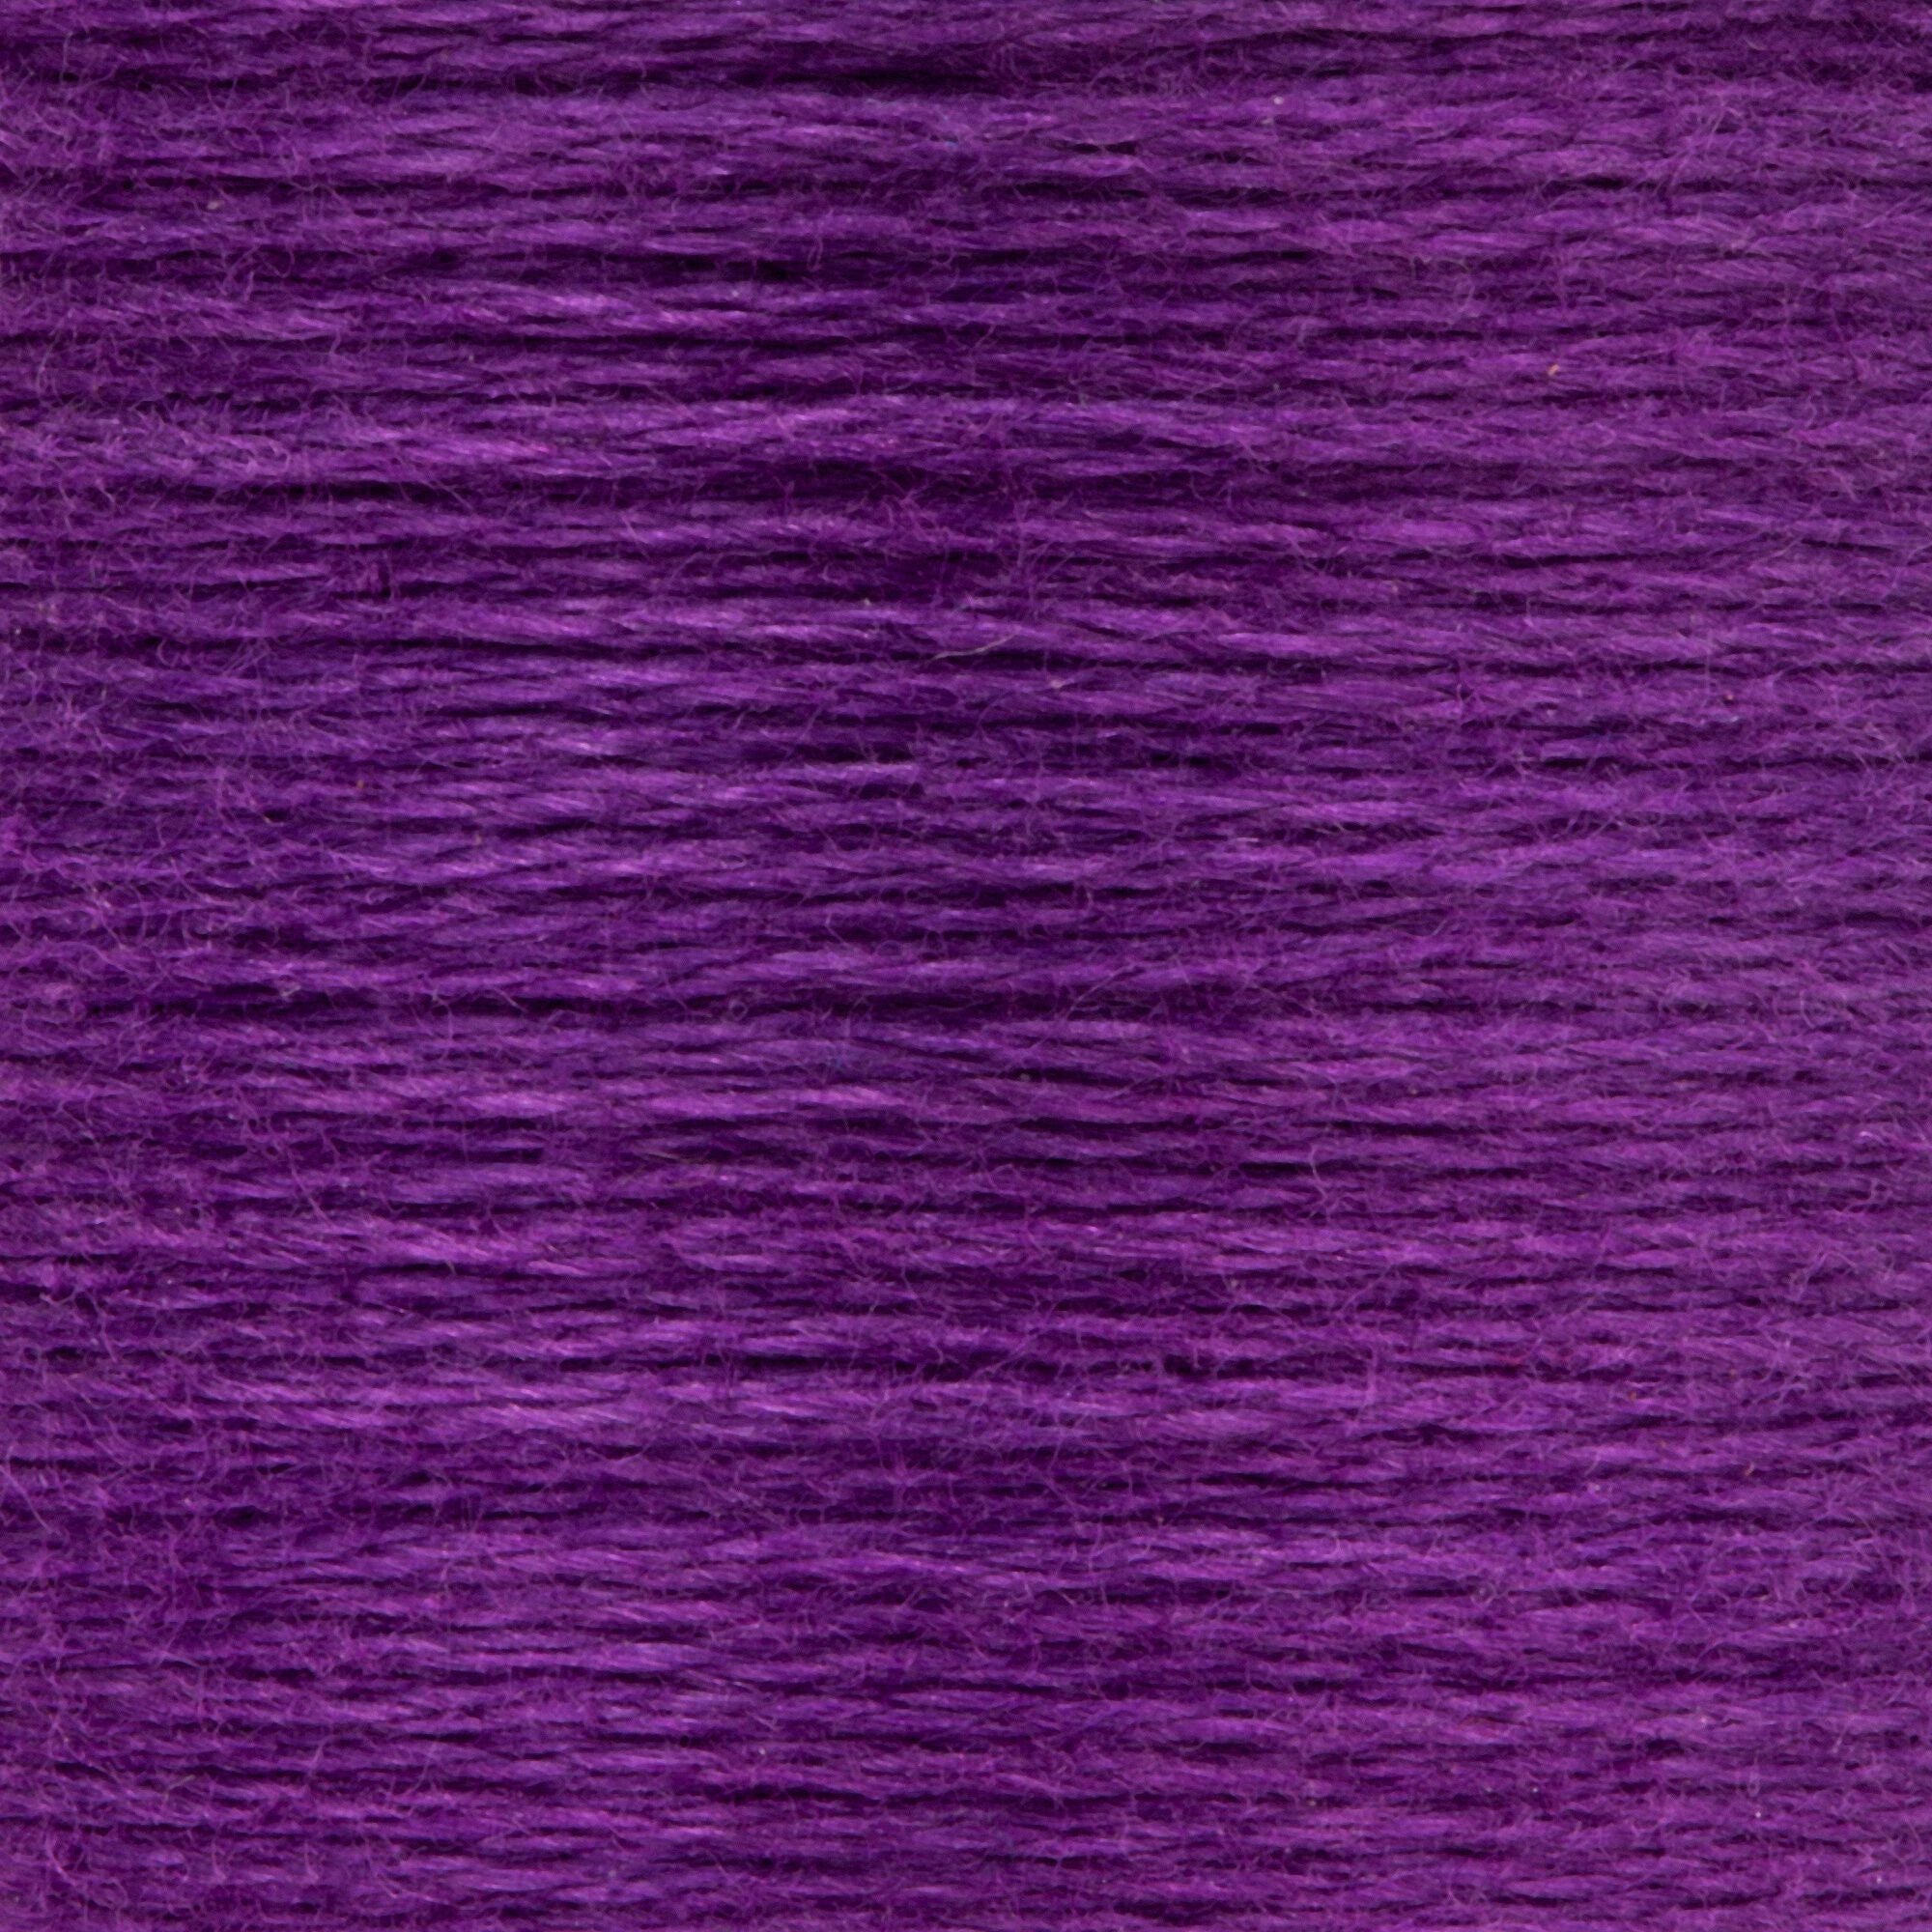 Anchor Embroidery Floss in Violet Dk